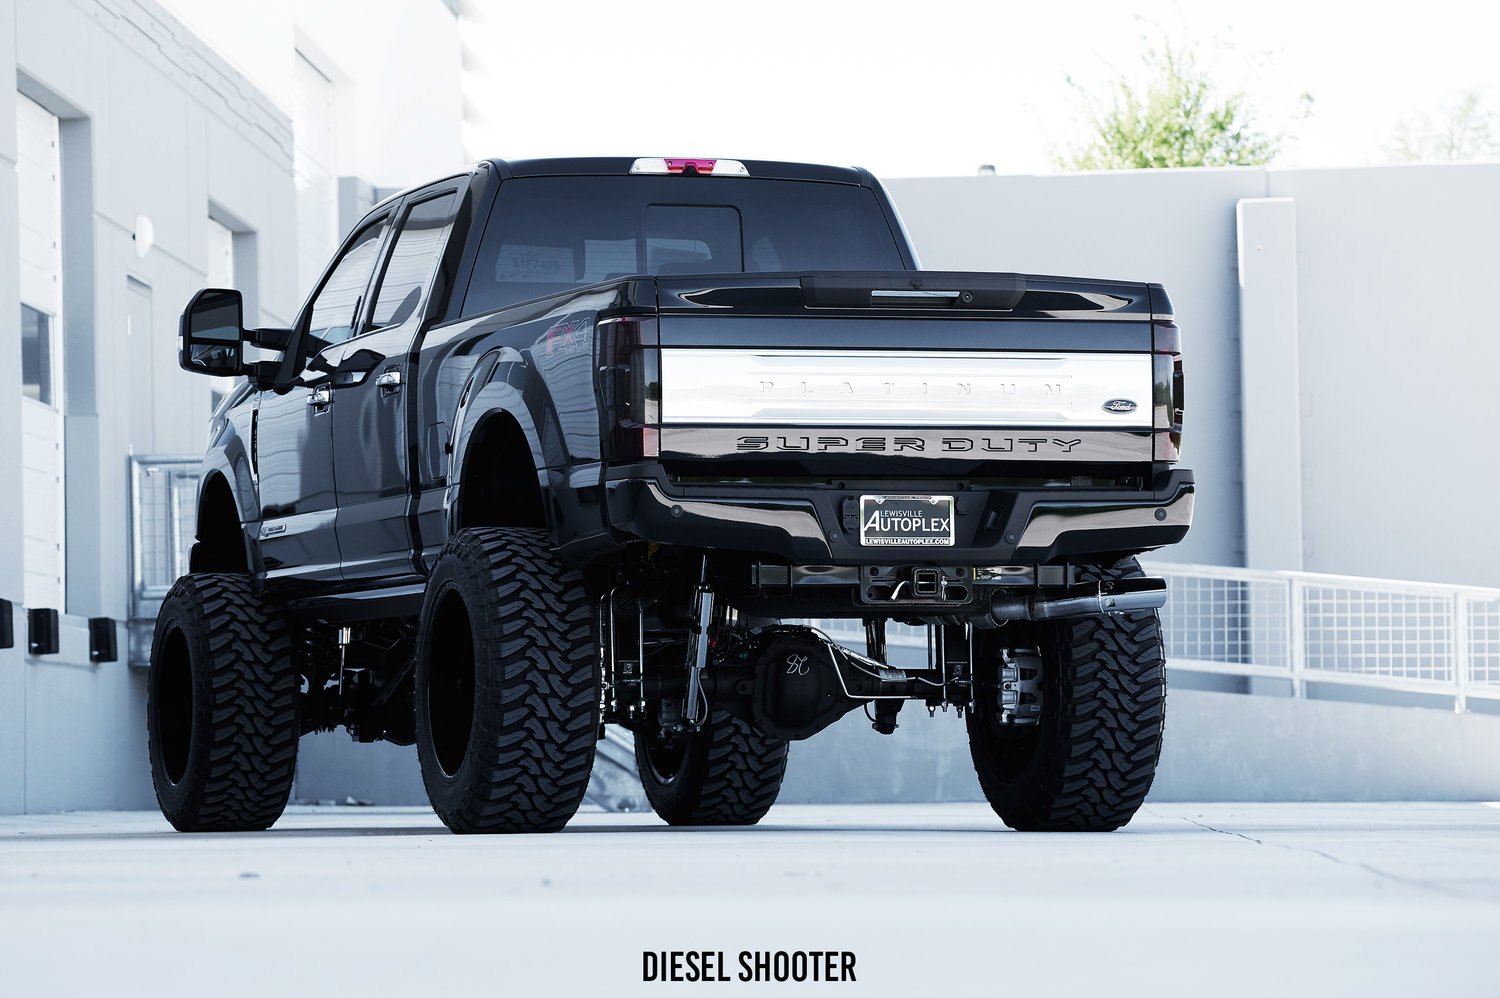 10 Inch Full Throttle Lift Kit on Ford Super Duty - Photo by Diesel Shooter